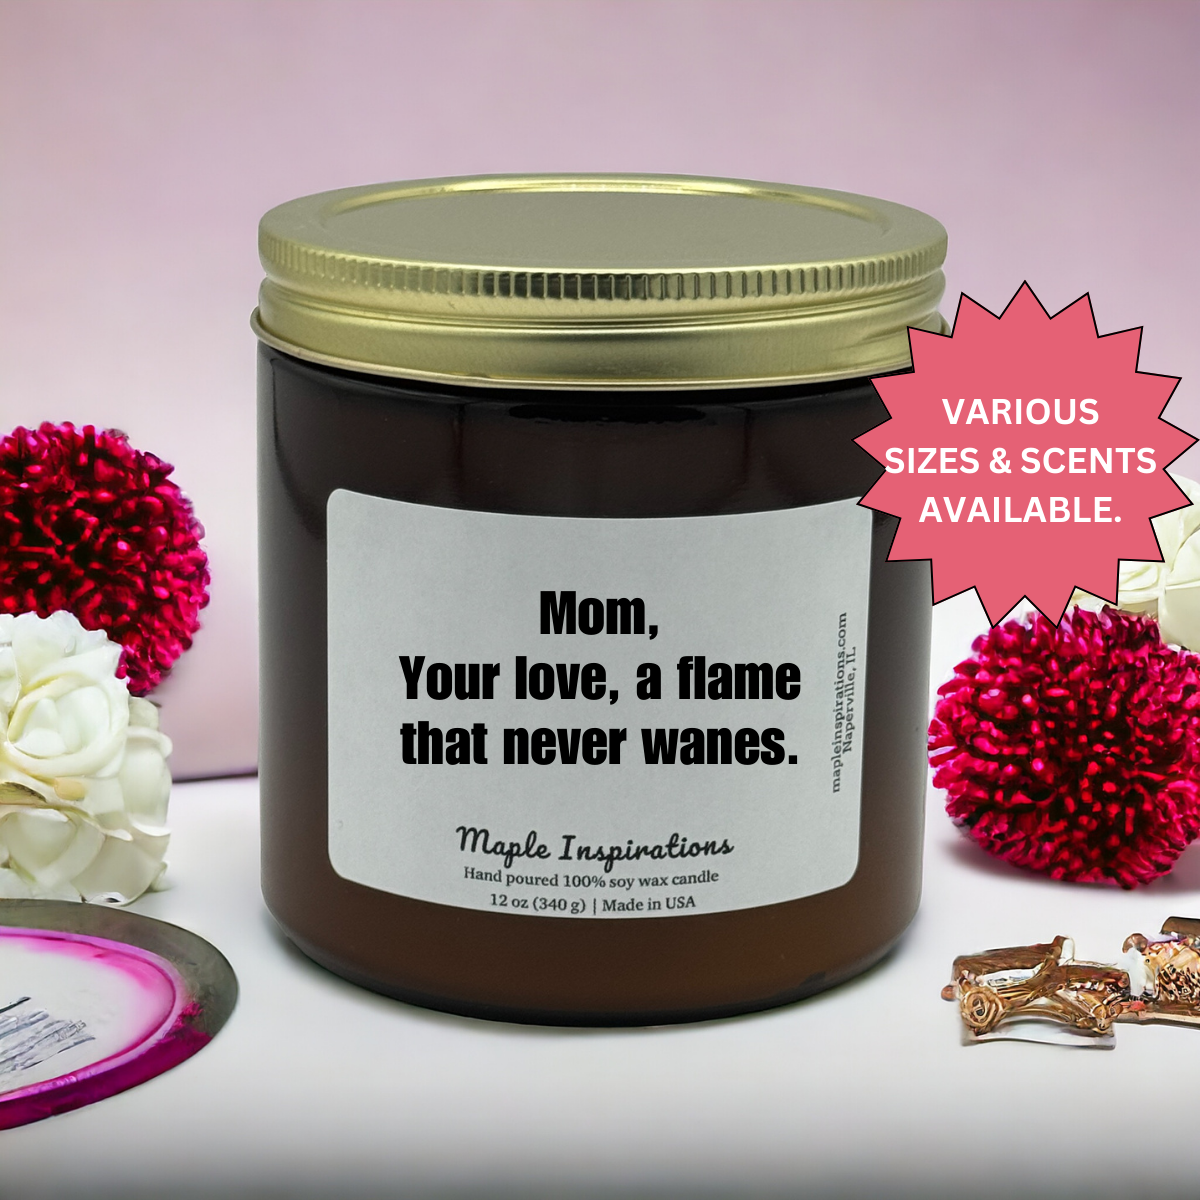 Mom your love a flams that never wanes candle for mom, mother's day gift for mom, wedding day mom gift ,mom birthday, mum